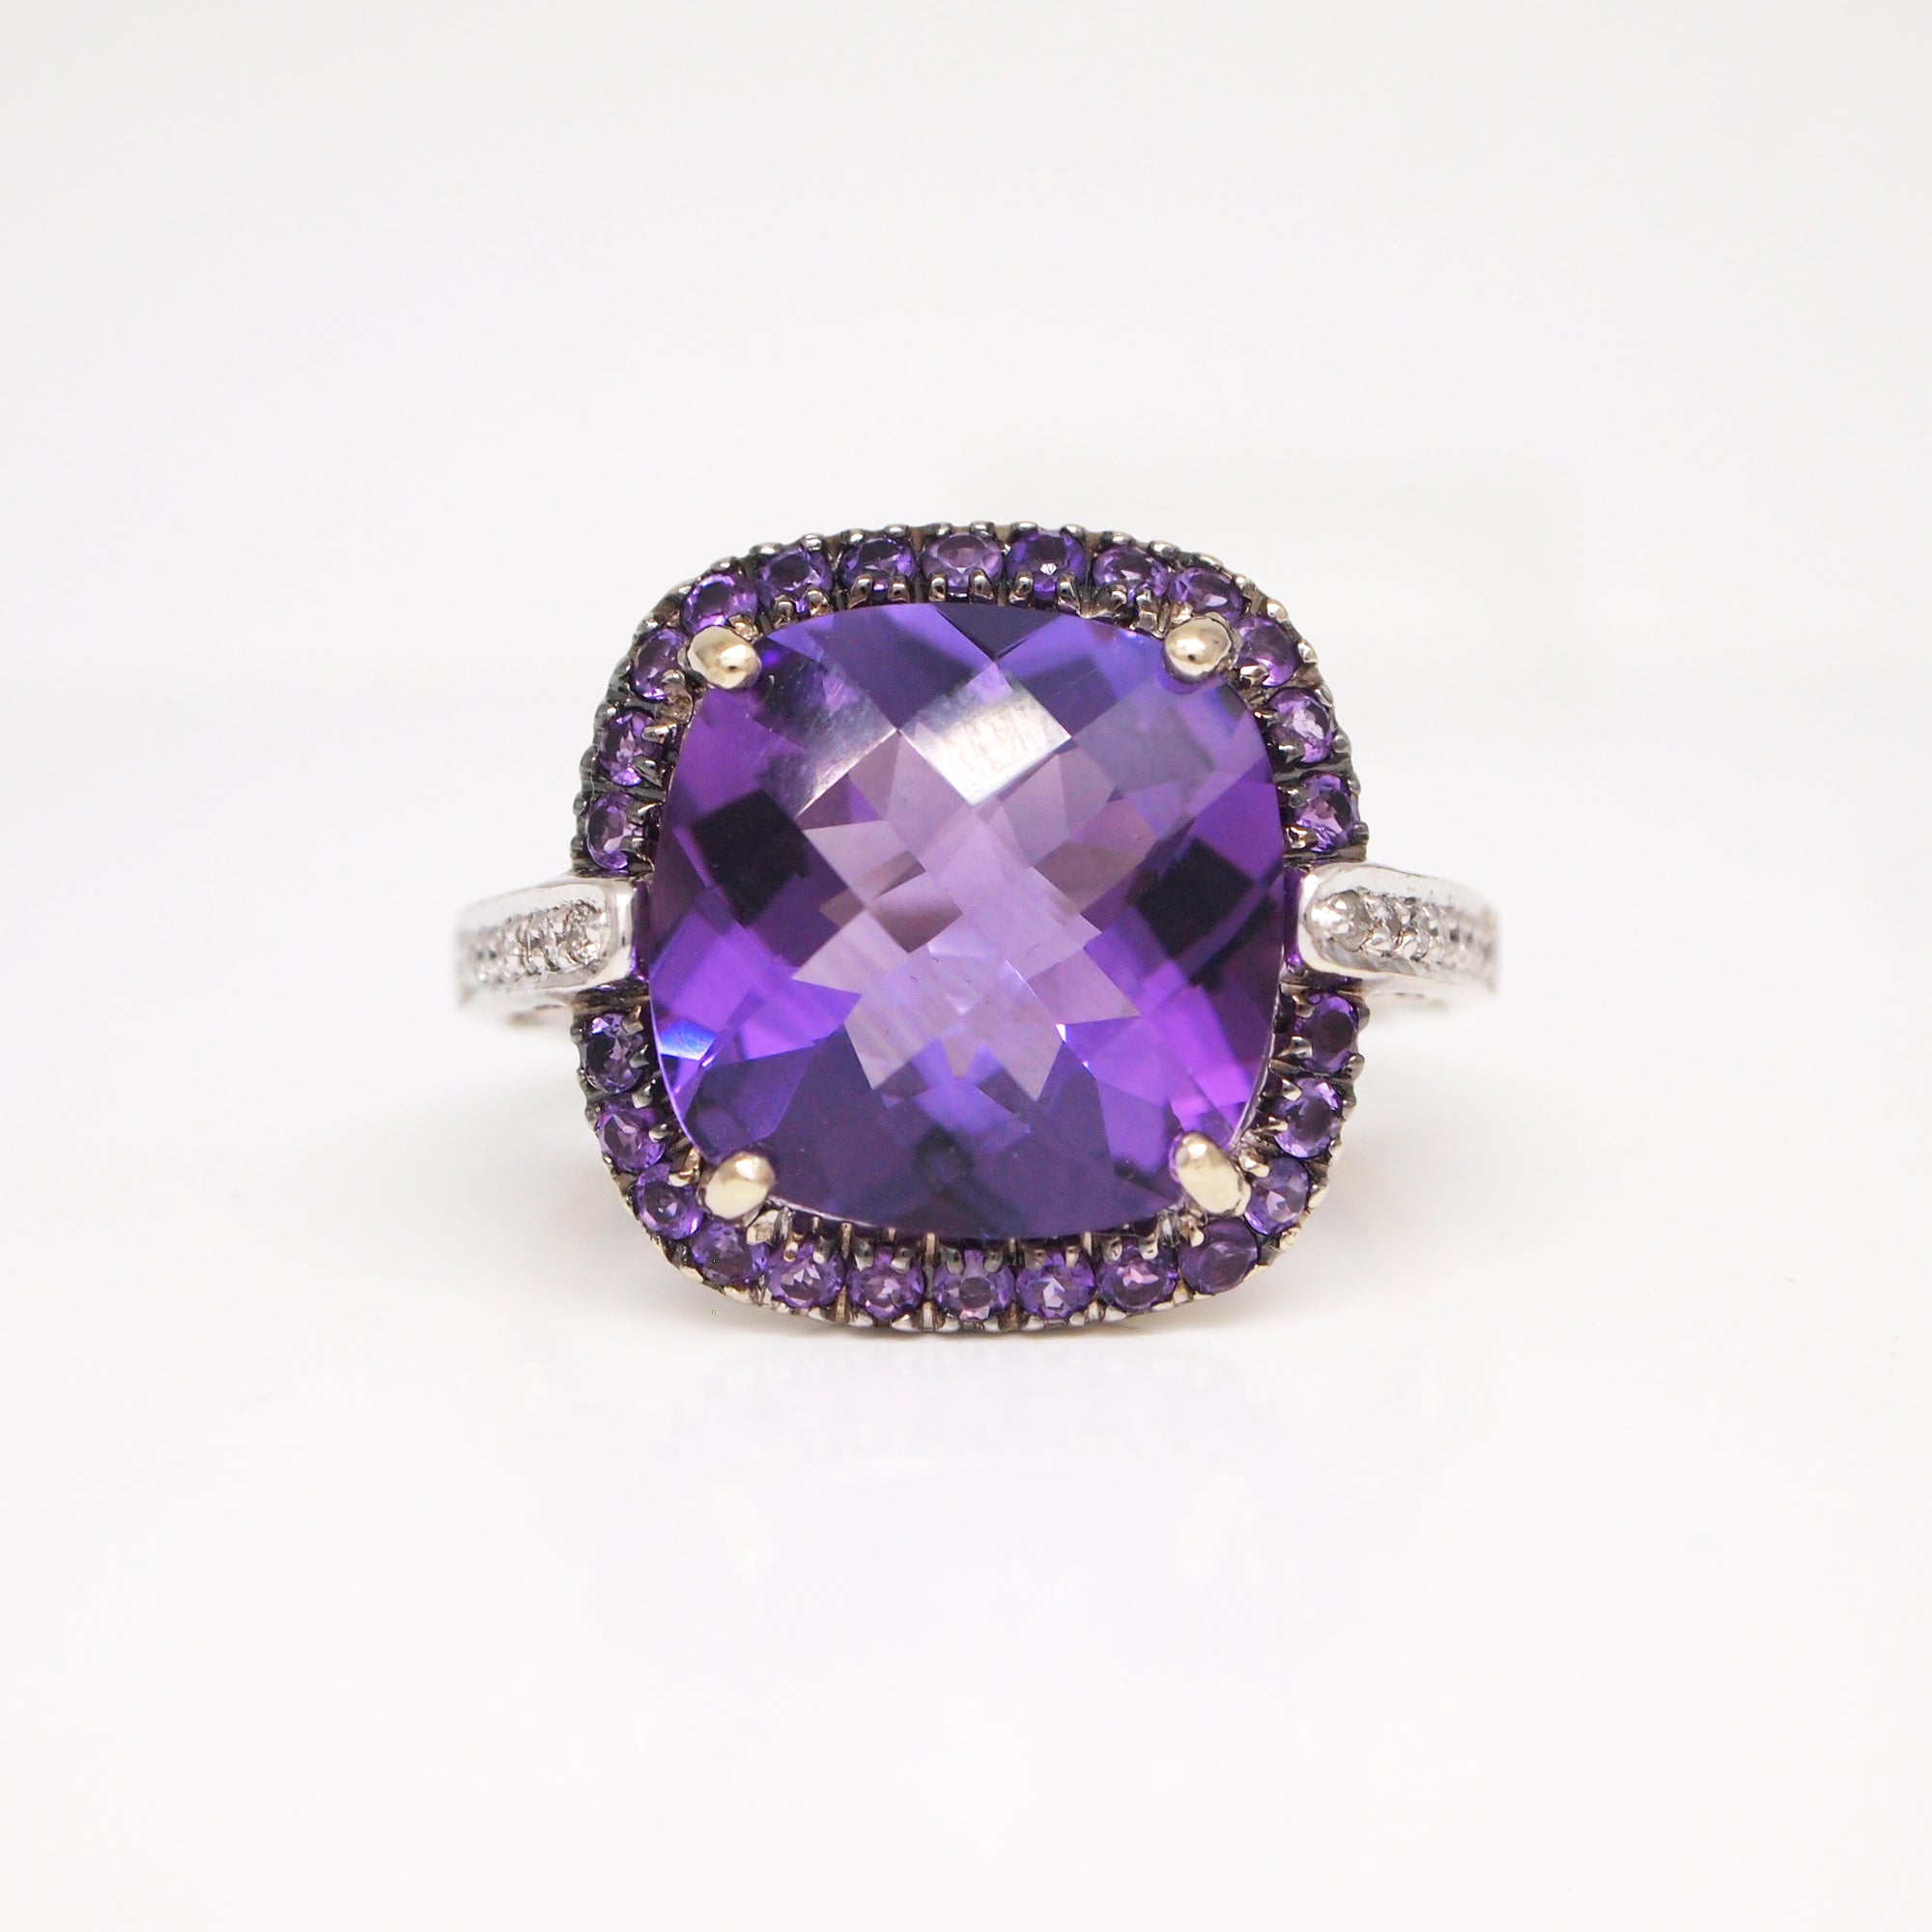 14K White Gold Amethyst And Diamond Ring